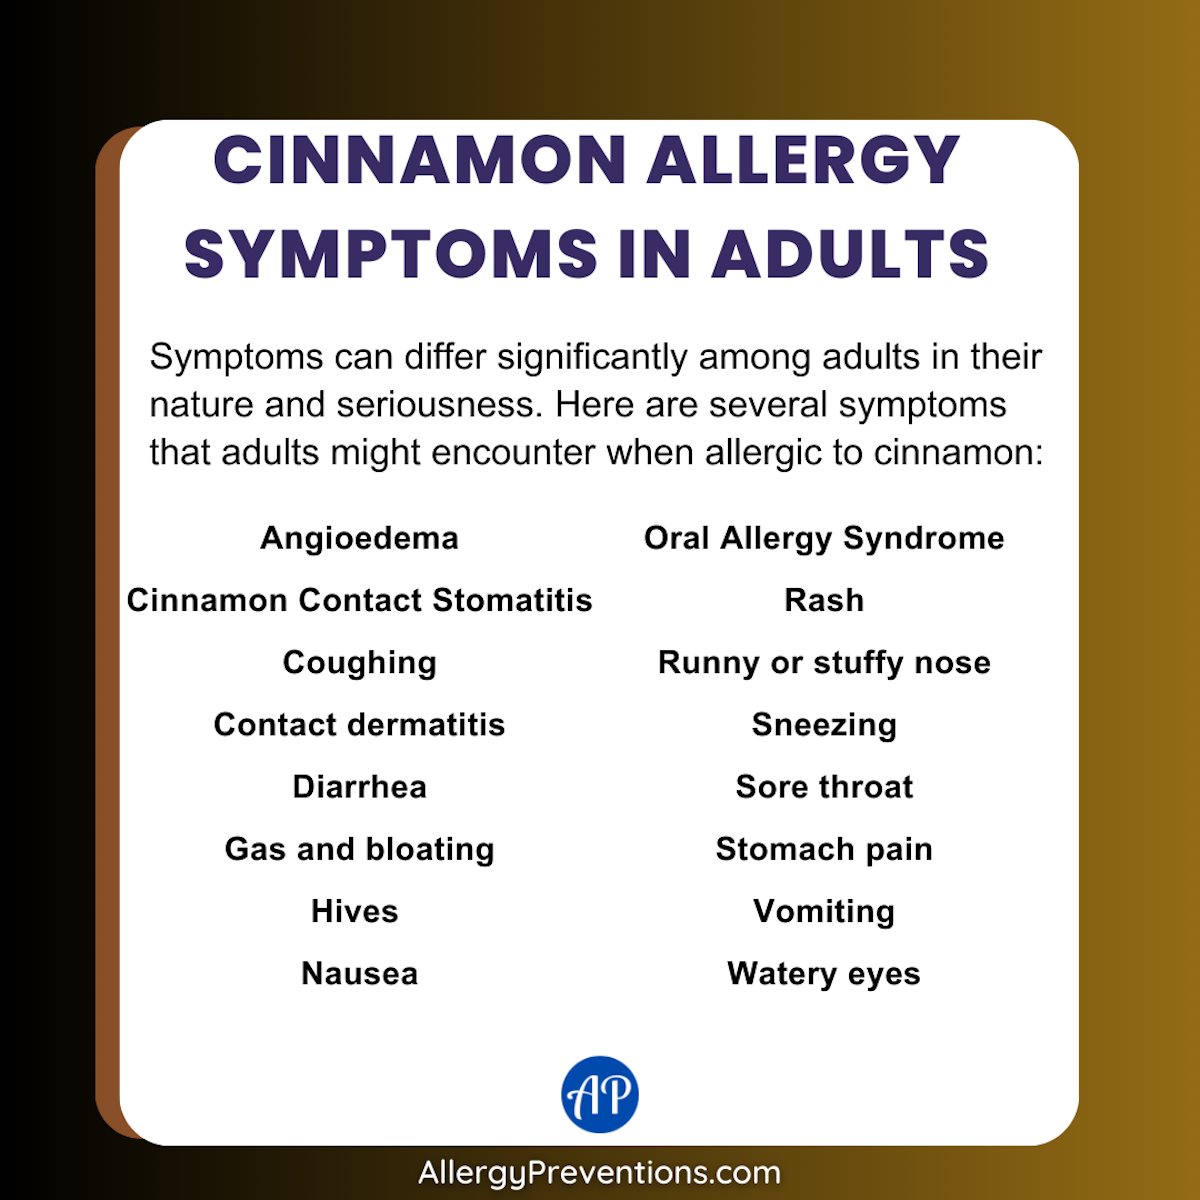 Cinnamon Allergy Symptoms in Adults Infographic. Symptoms can differ significantly among adults in their nature and seriousness. Here are several symptoms that adults might encounter when allergic to cinnamon: Angioedema, Cinnamon, Contact Stomatitis, Coughing, Contact dermatitis, Diarrhea, Gas and bloating, Hives , Nausea, Oral Allergy Syndrome, Rash, Runny or stuffy nose, Sneezing, Sore throat, Stomach pain, Vomiting, Watery eyes.